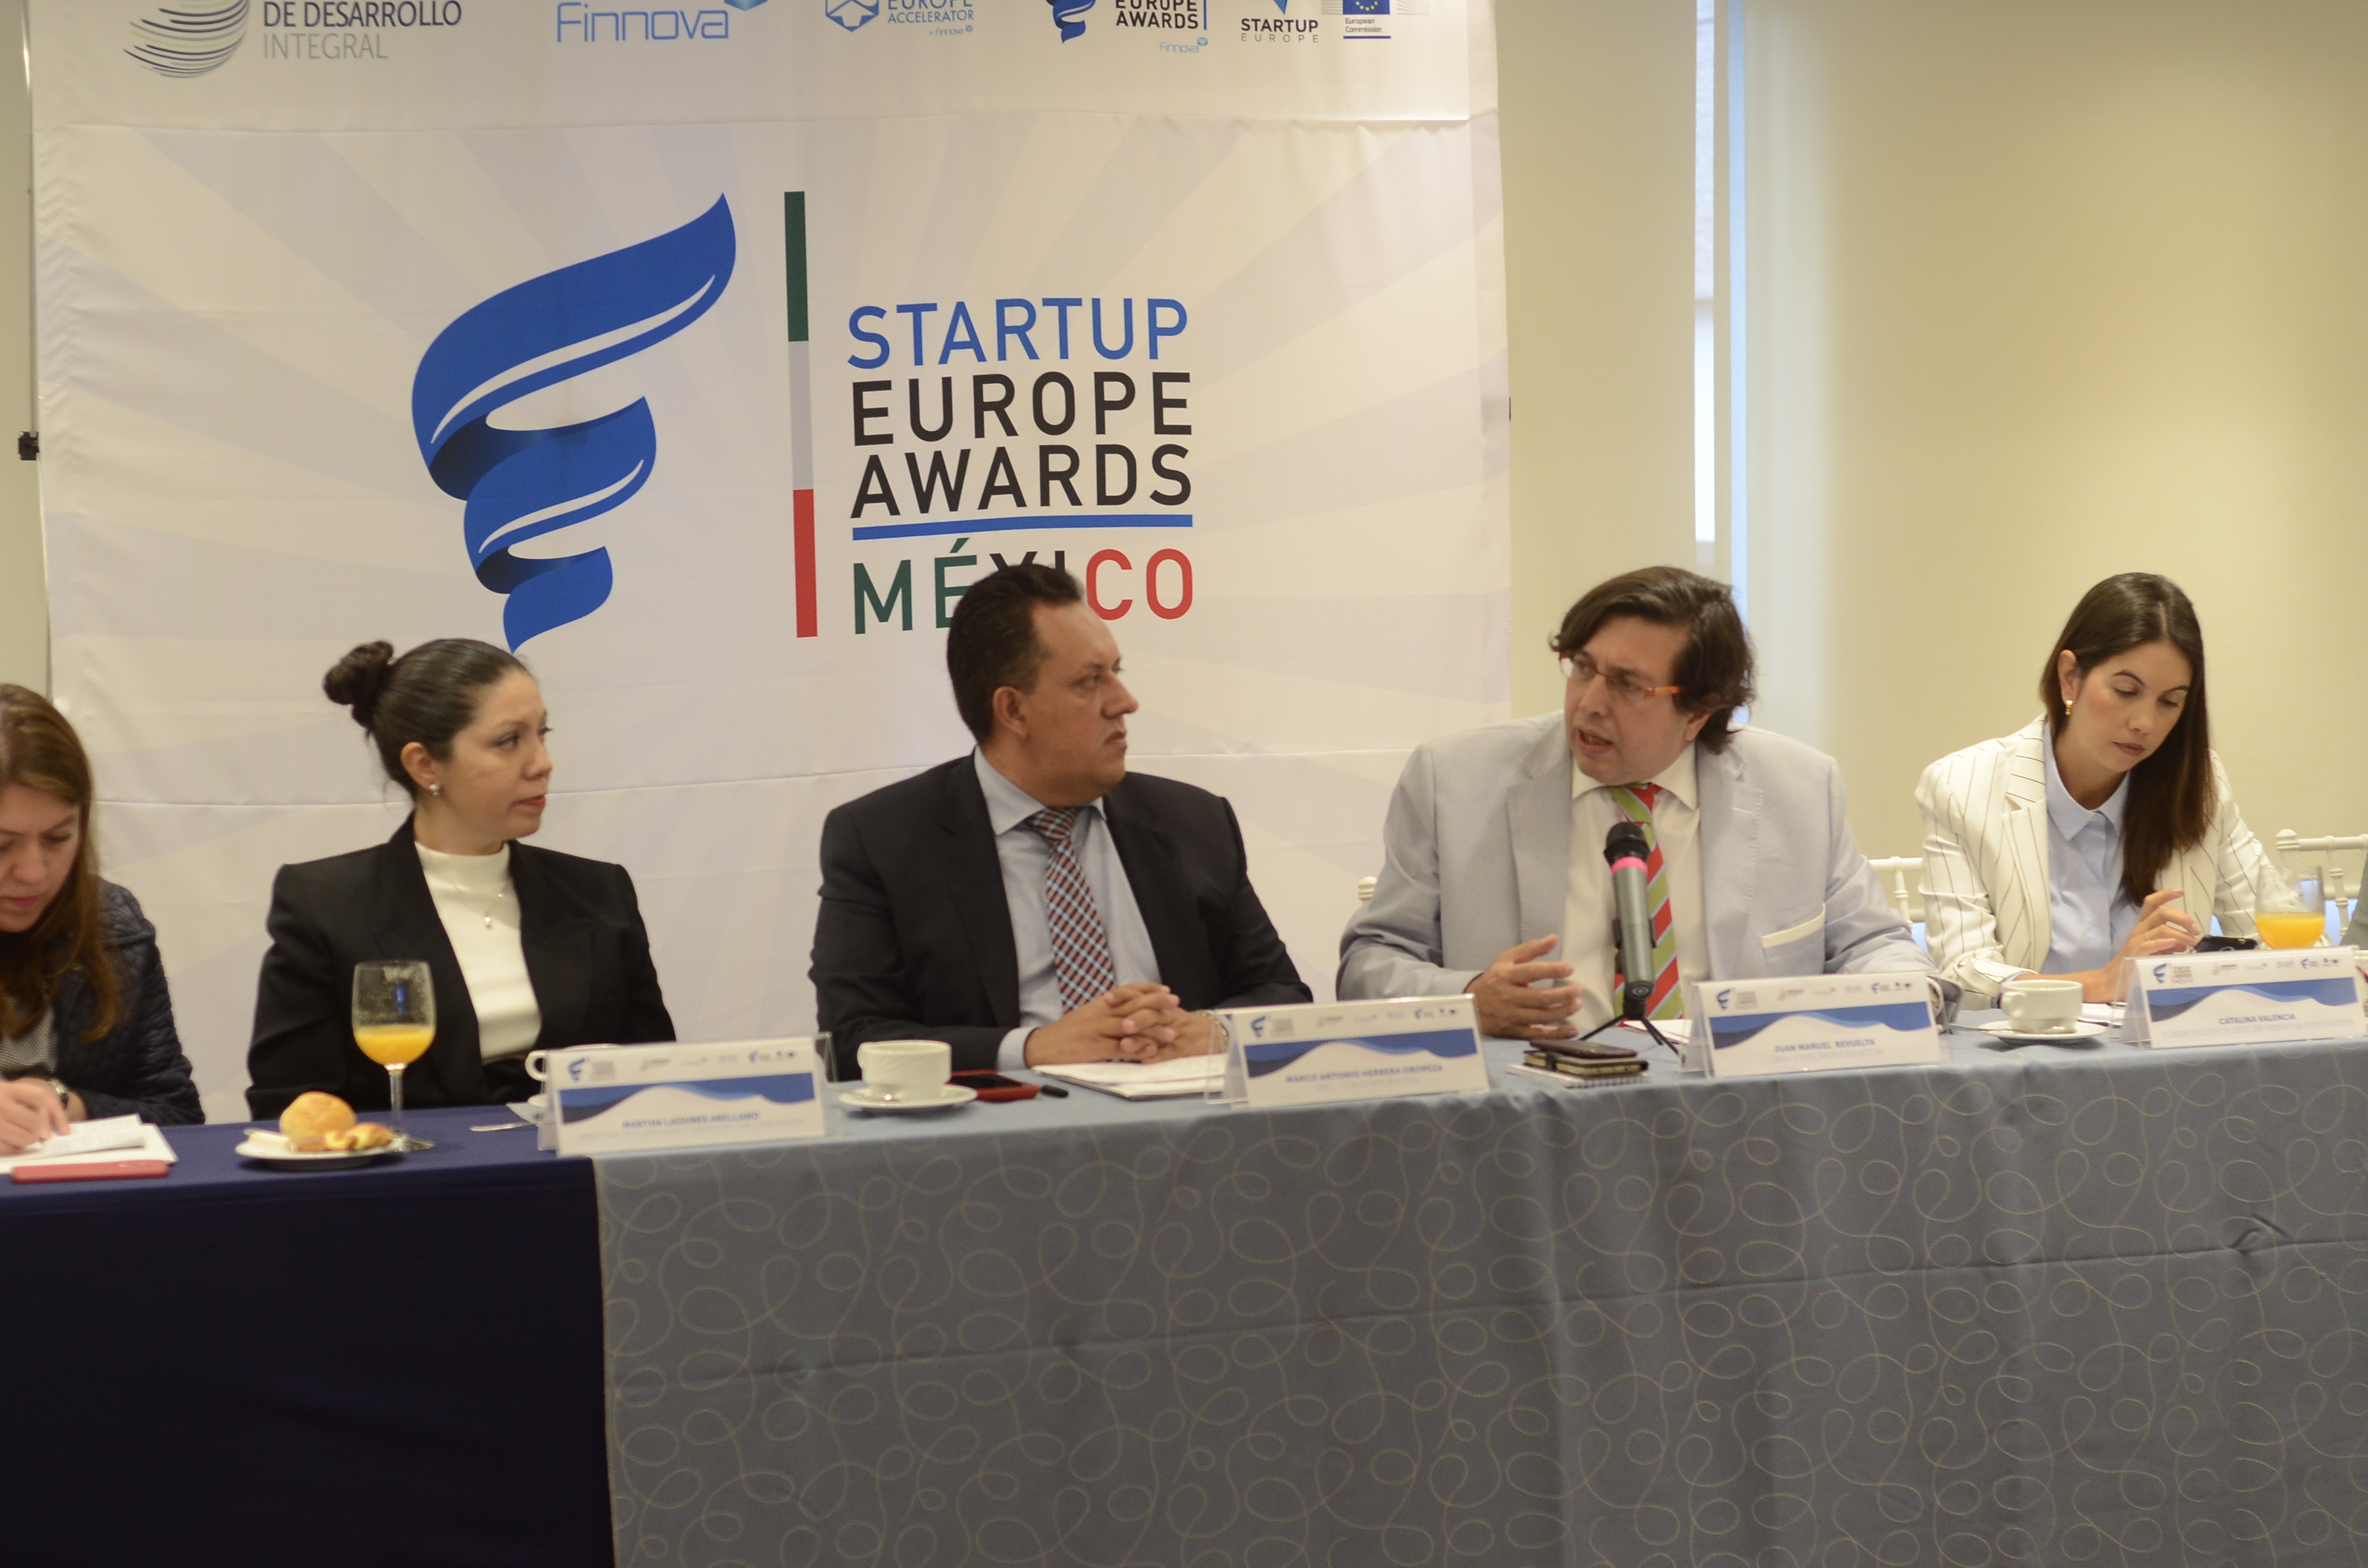 México StartUp Europe Awards: “Creating open innovative environments for the Mexican agro-food industry”